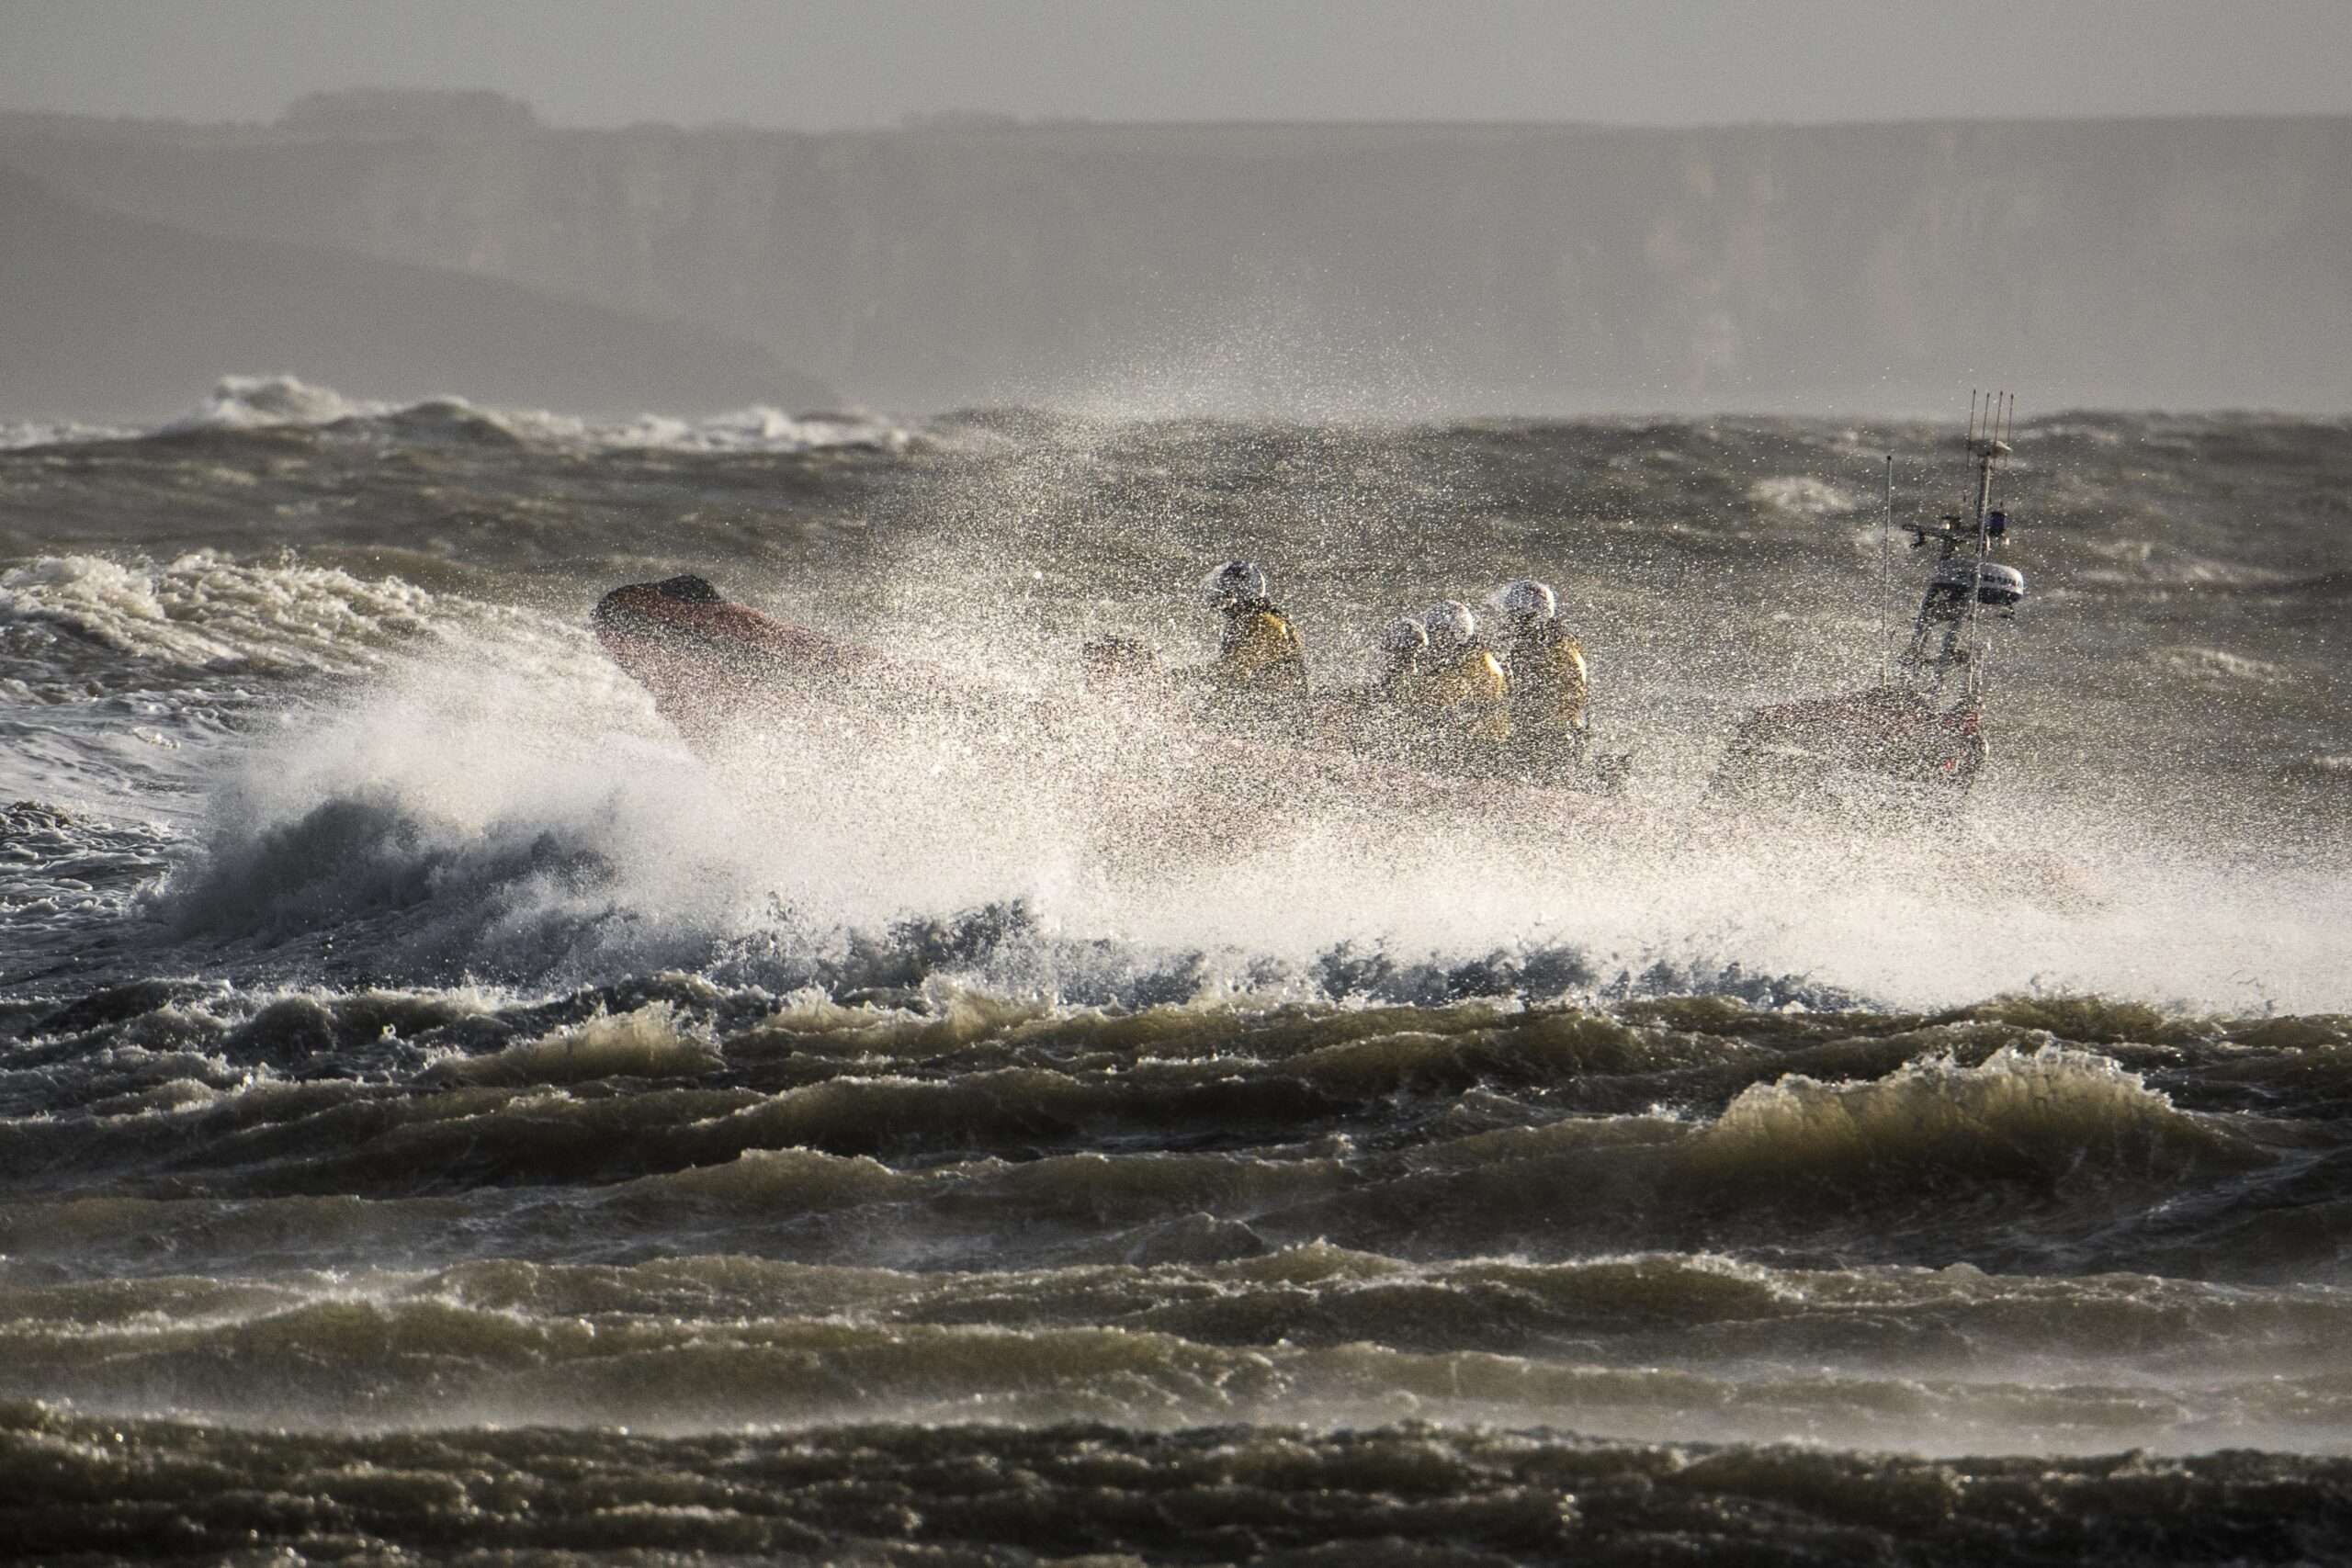 RNLI warns people over dangers at coast as Storm Ciaran approaches